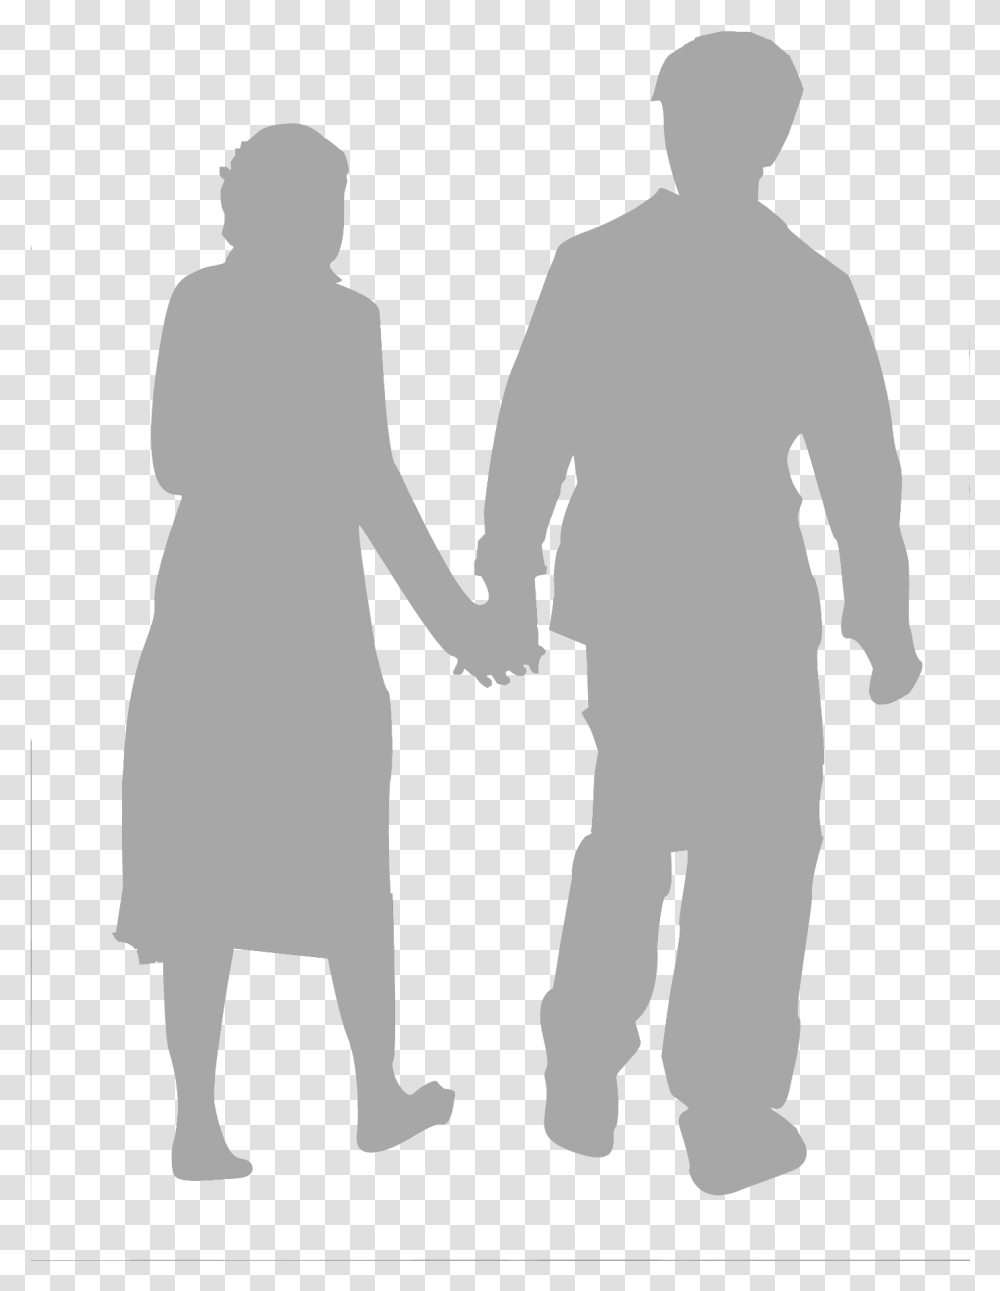 Man Walking Silhouette Person Walking Silhouette People Silhouette Grey, Hand, Holding Hands, Family, Clothing Transparent Png